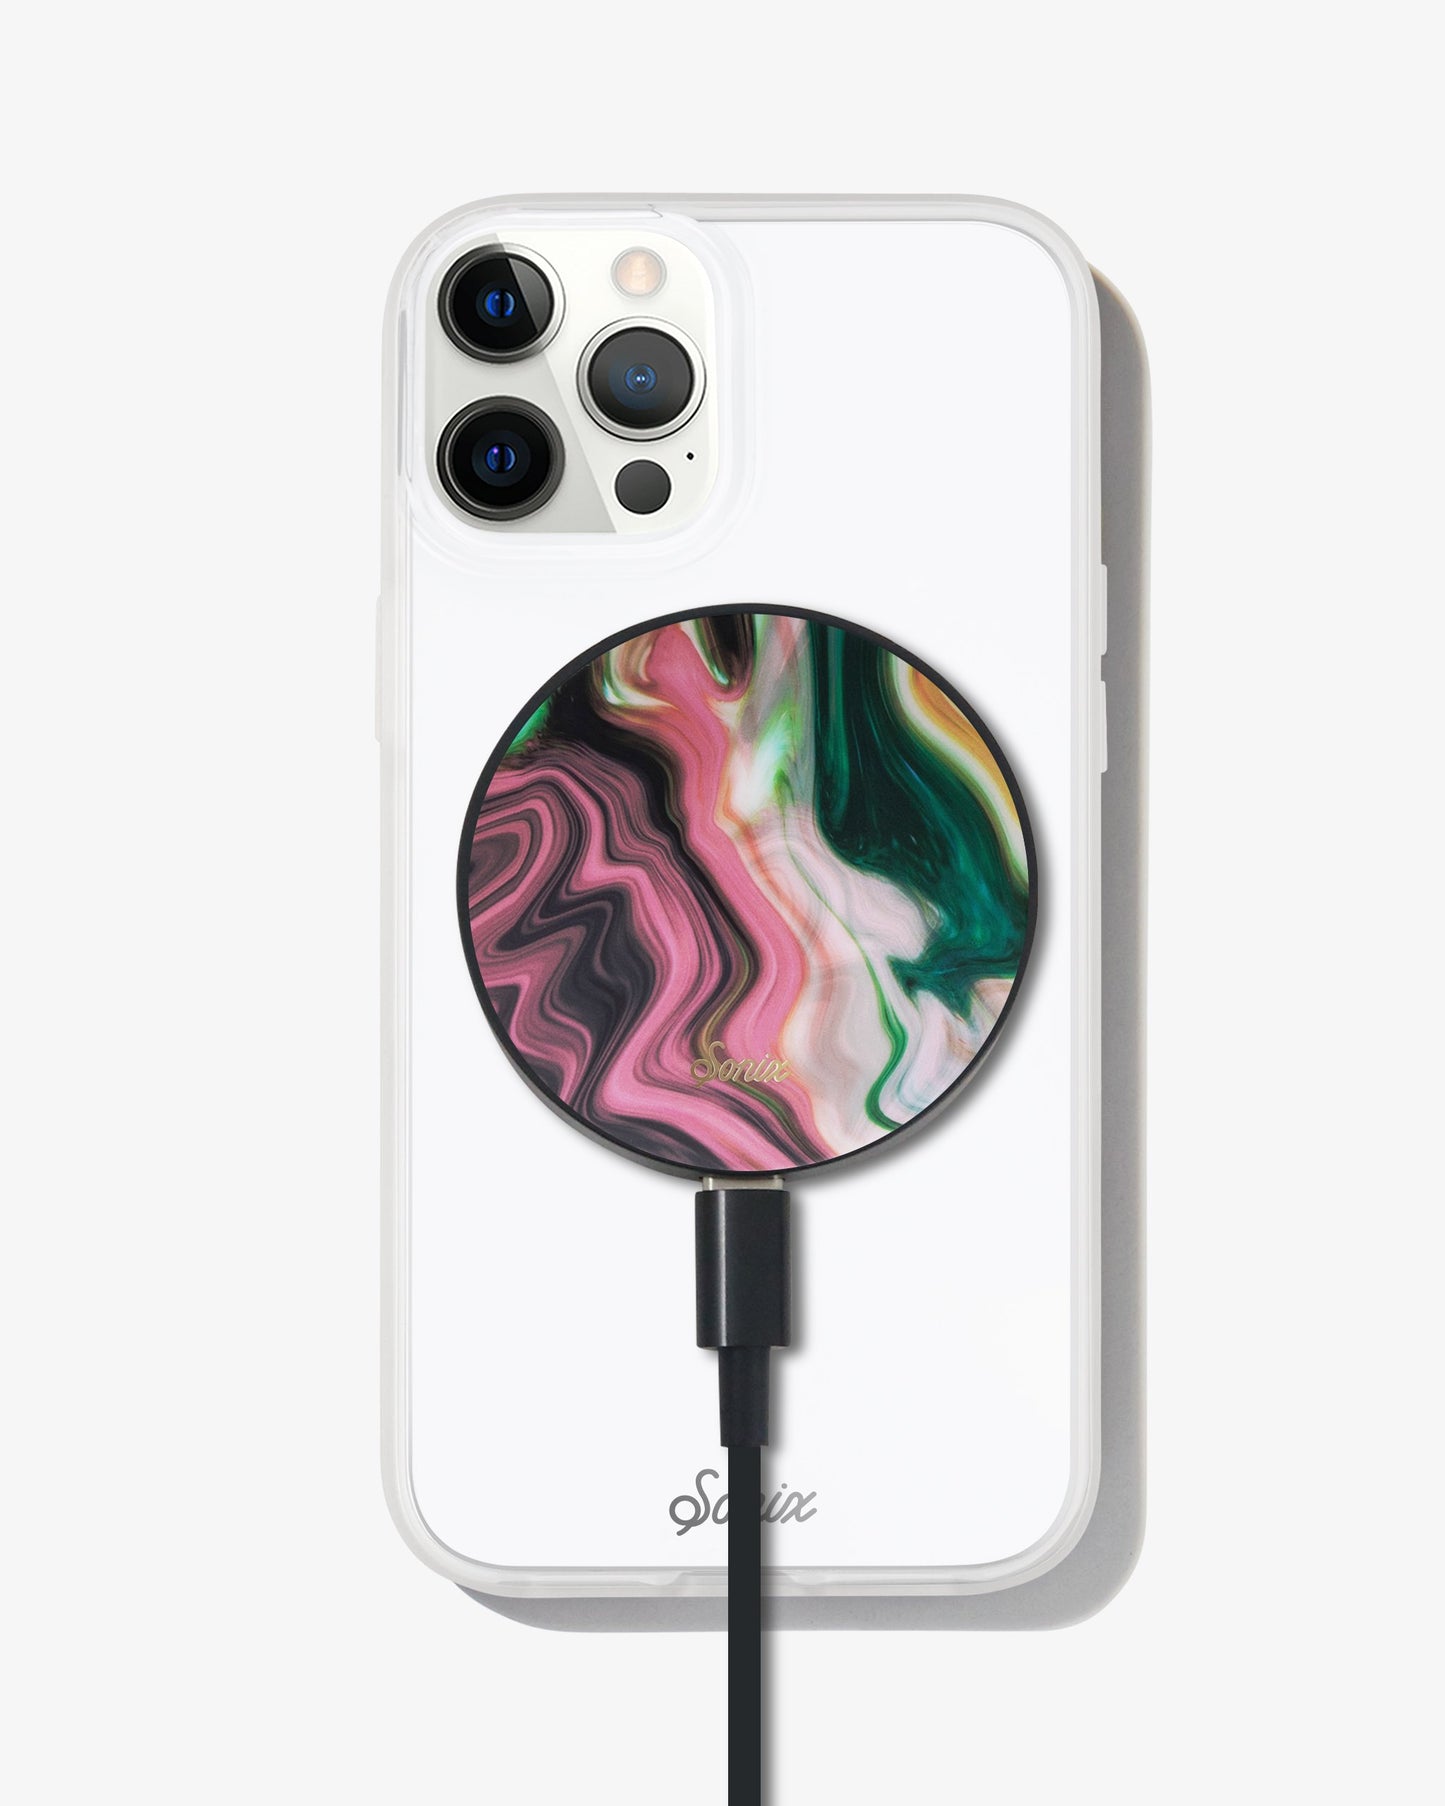 MagLink™ Wireless Charger - Agate